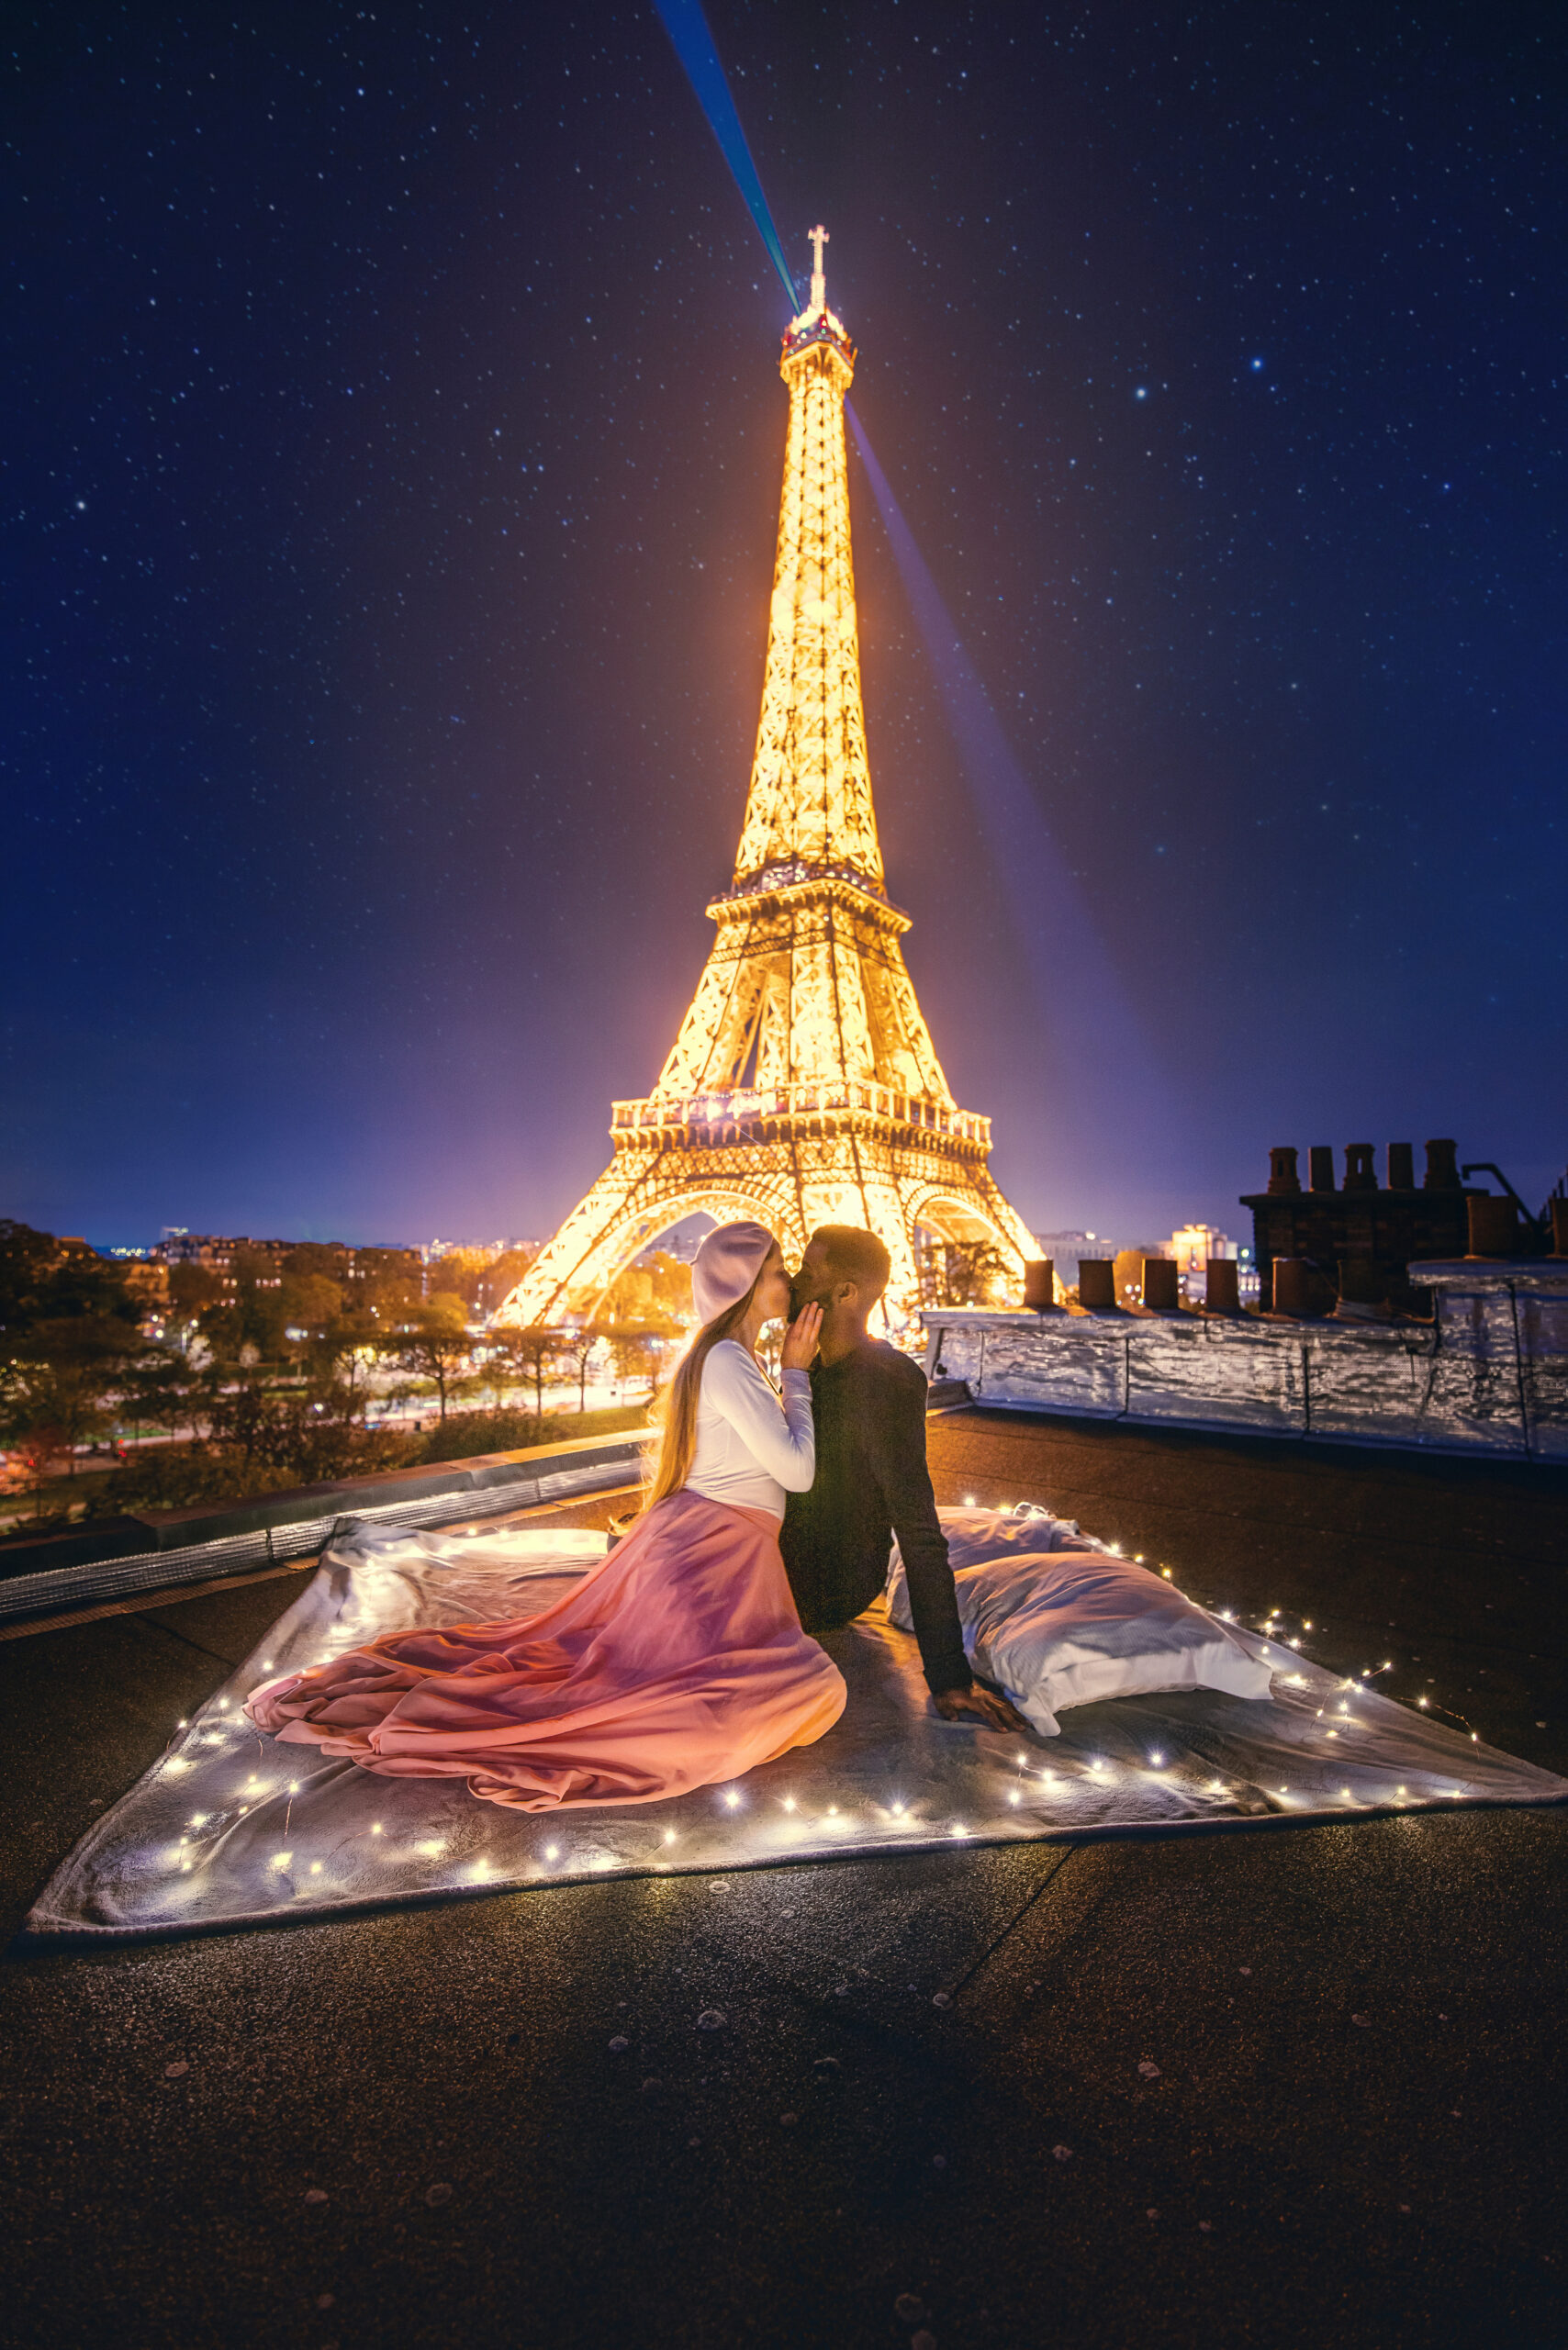 Couple sits kissing on a rooftop overlooking the lit up Eiffel Tower at night.